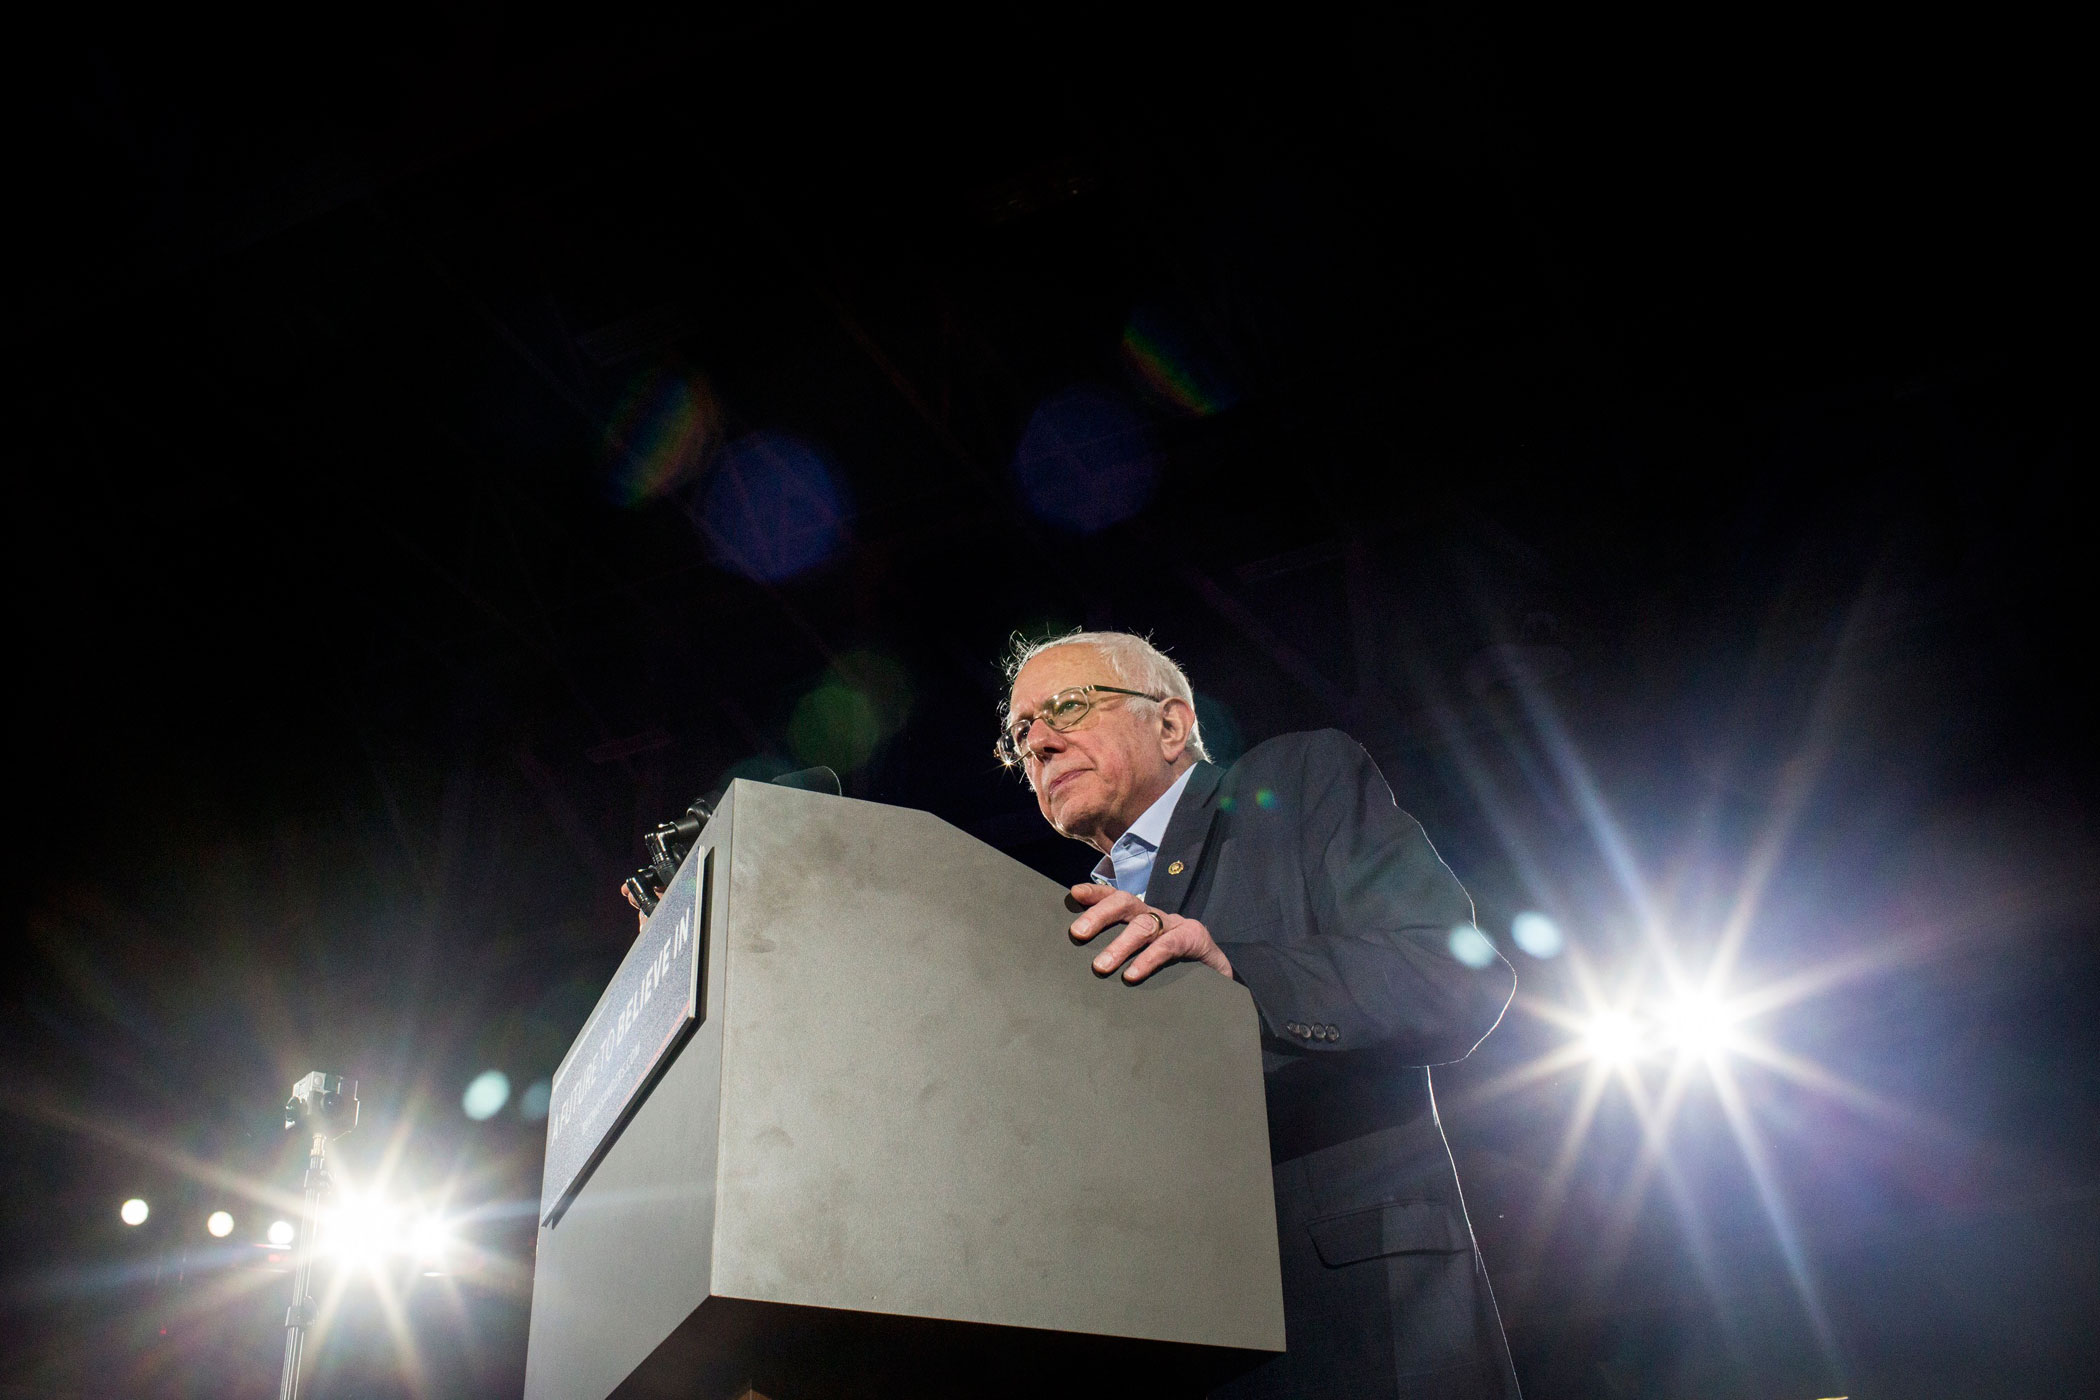 Bernie Sanders speaks during a campaign rally and concert in Iowa City, Iowa on Jan. 30, 2016. (Natalie Keyssar for TIME)